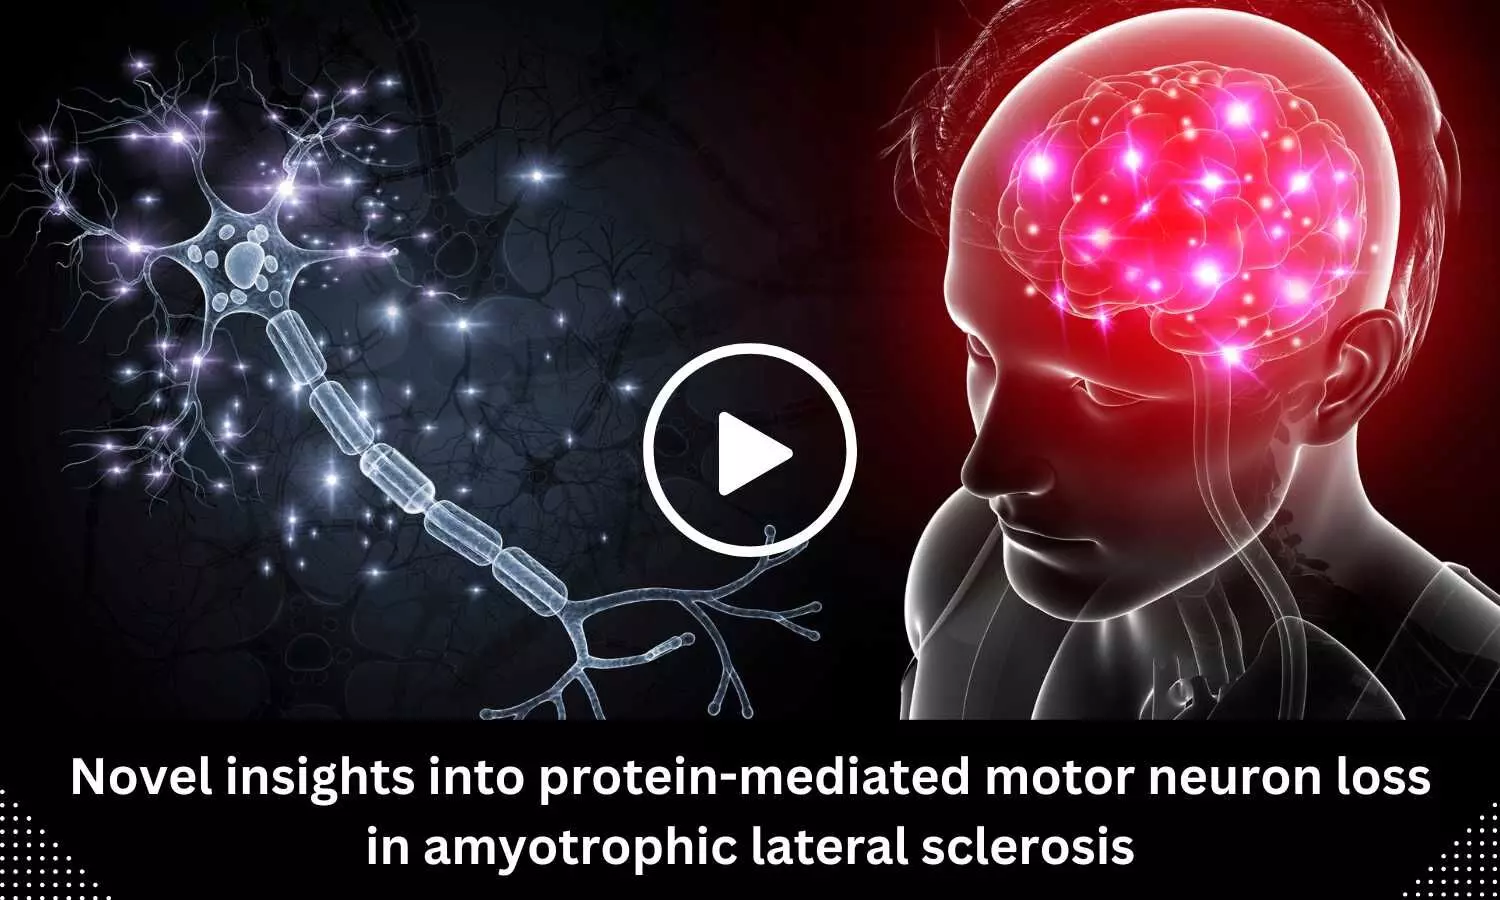 Novel insights into protein-mediated motor neuron loss in amyotrophic lateral sclerosis